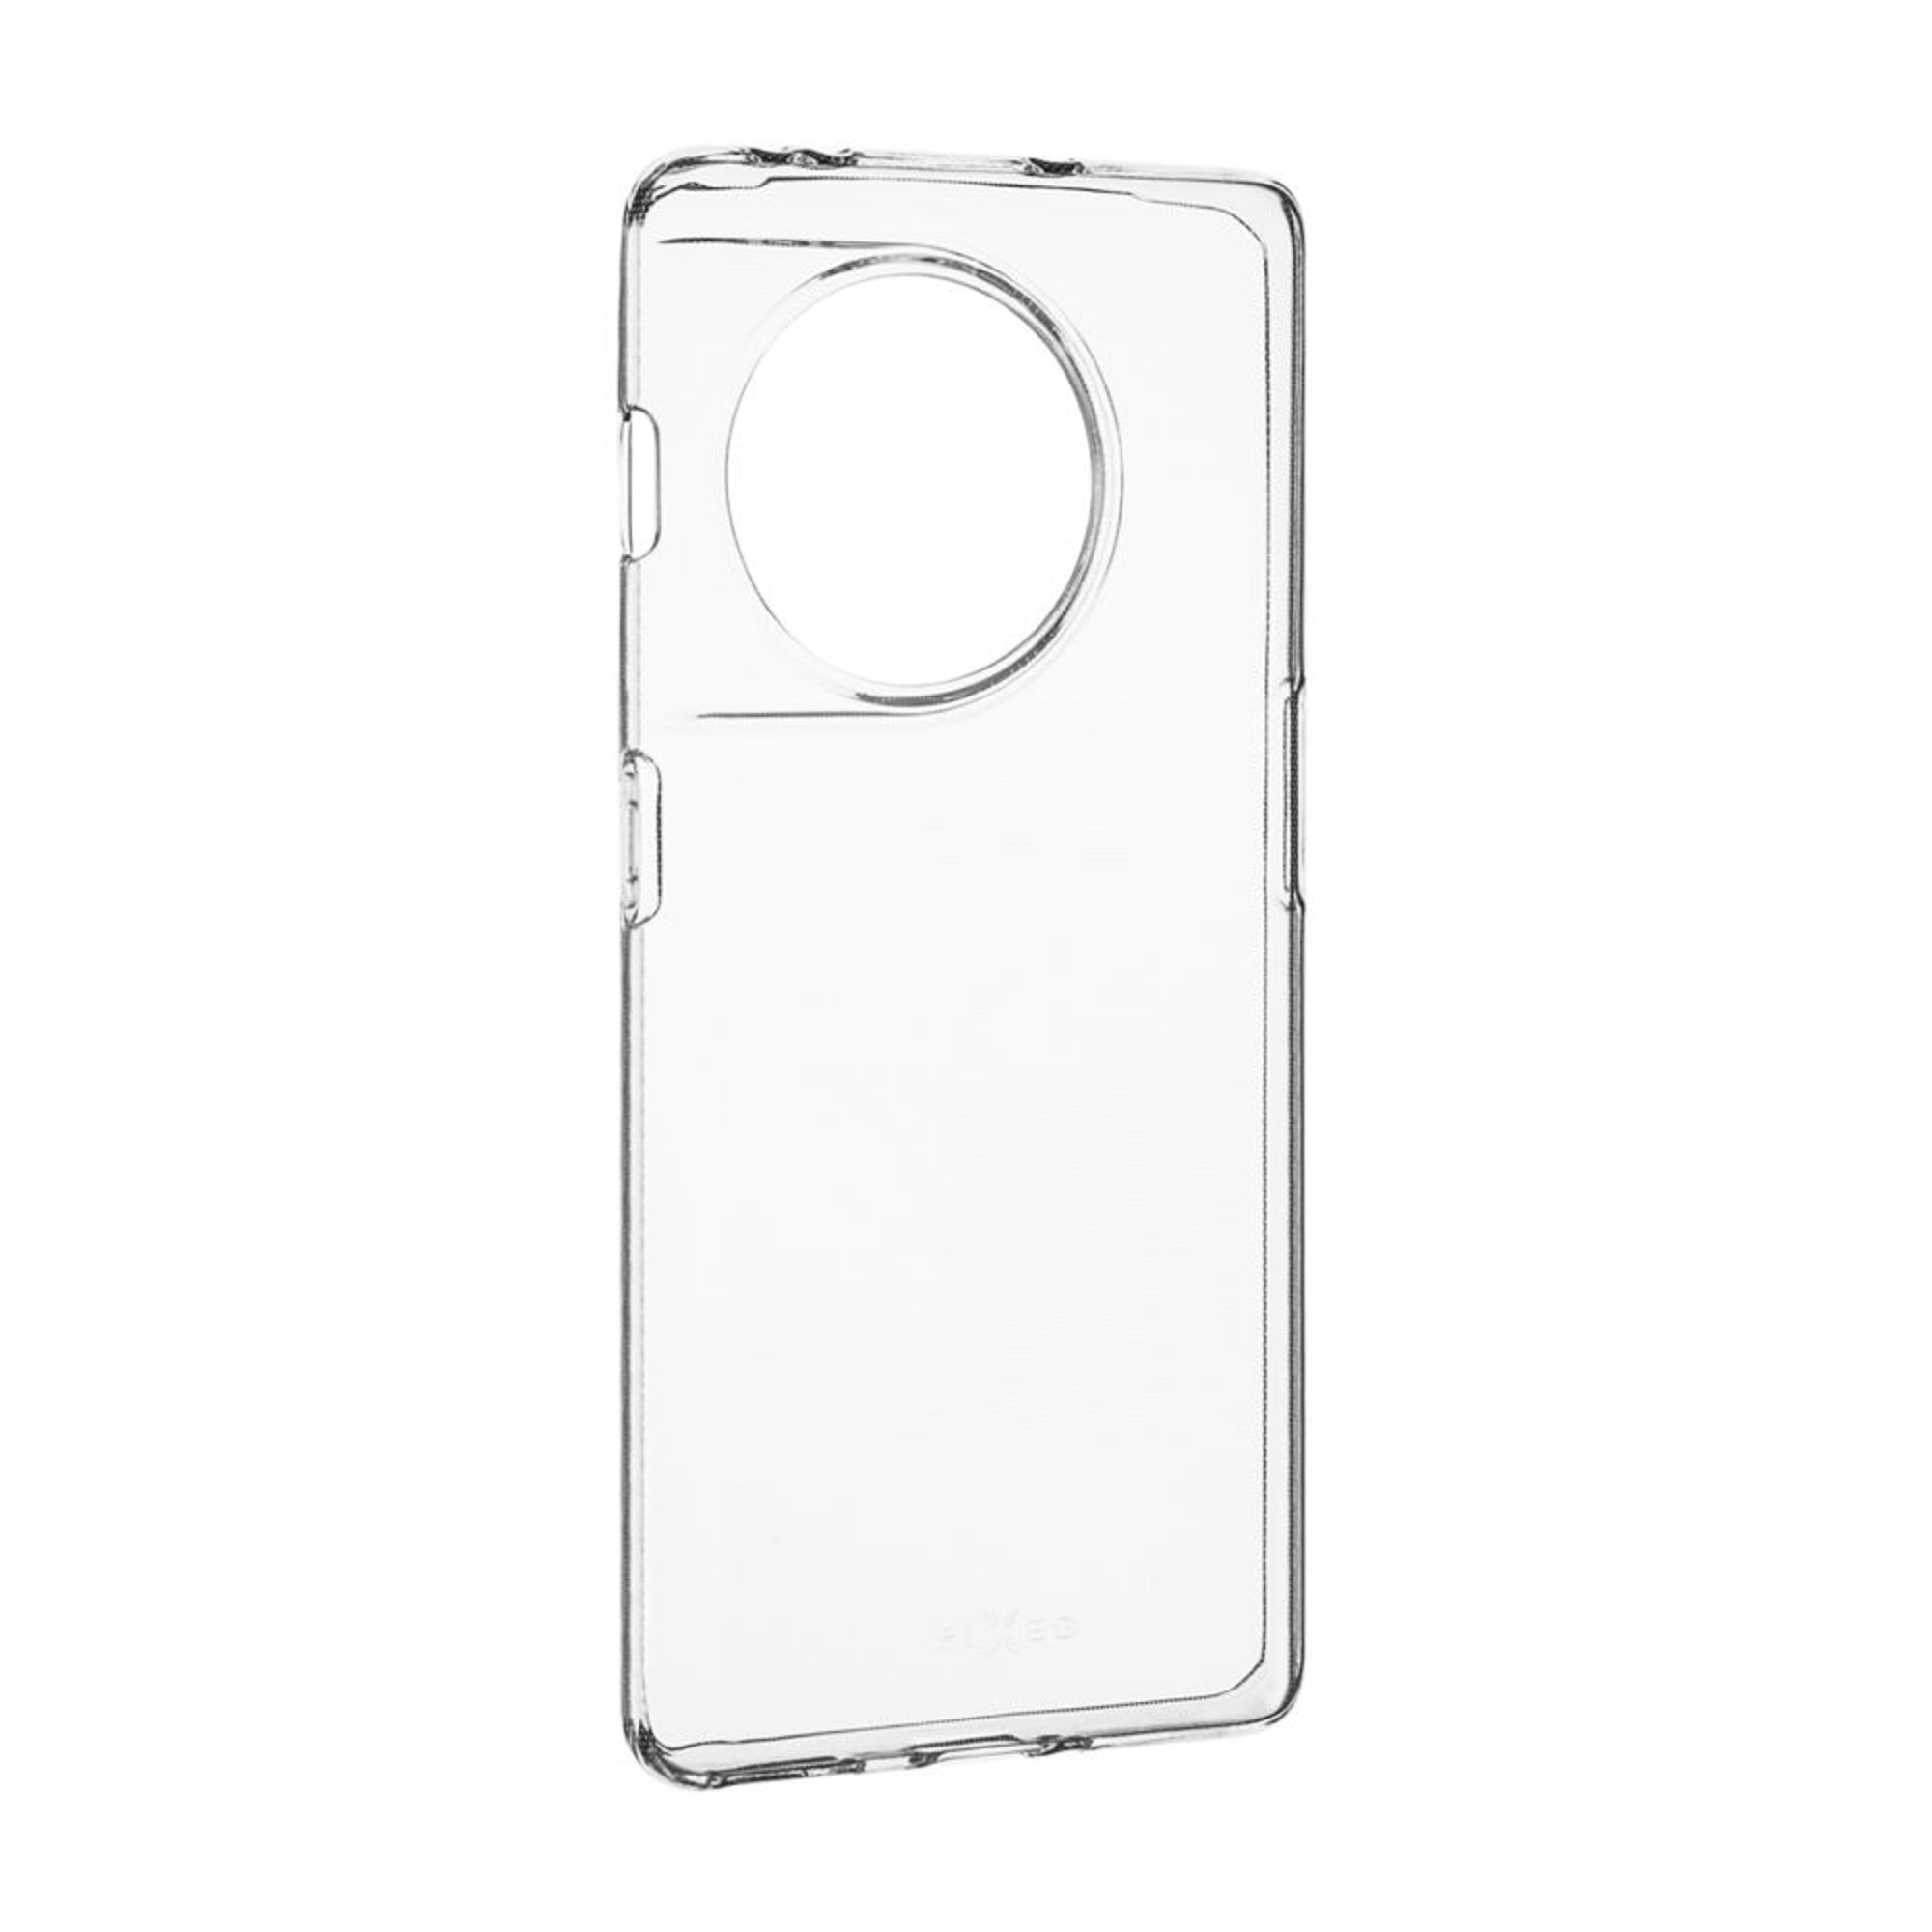 FIXTCC-1111, 5G, Transparent OnePlus, Backcover, 11R FIXED